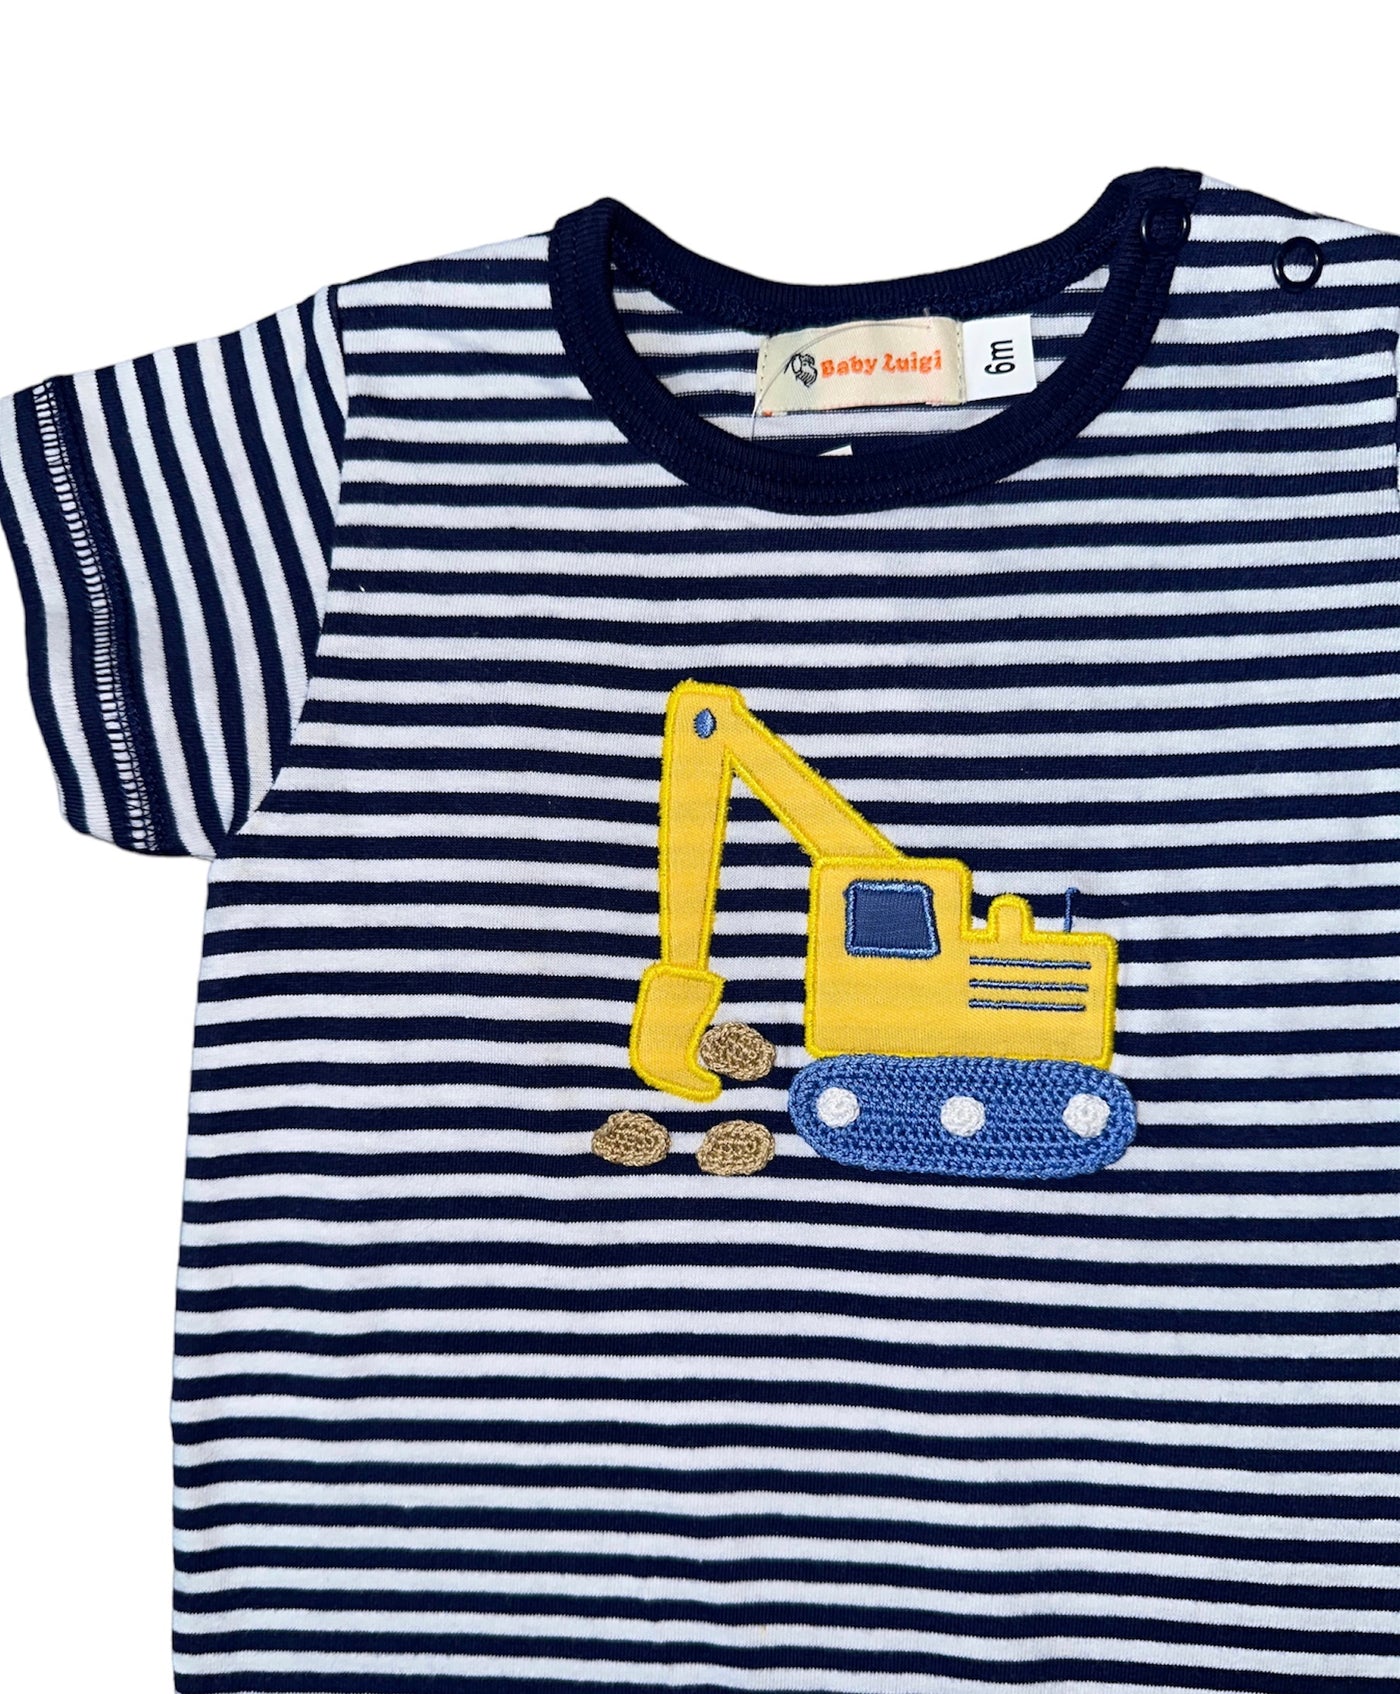 Royal and White Stripe Romper with Backhoe